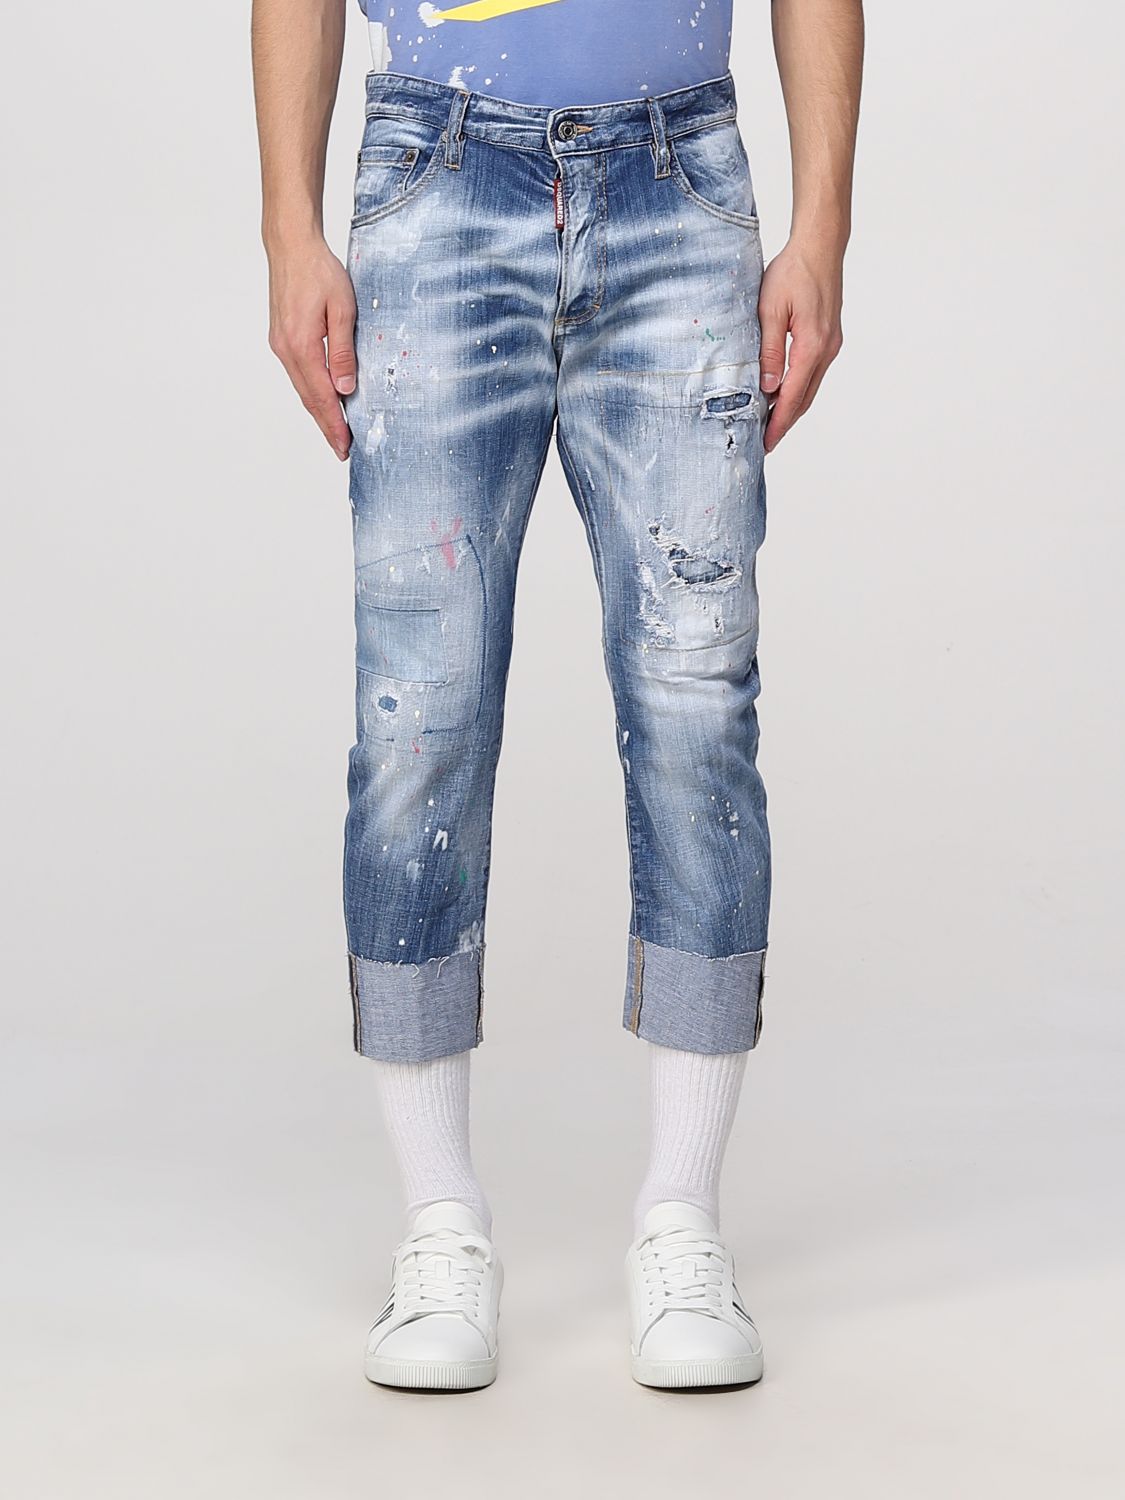 Jeans Dsquared2: Jeans Dsquared2 in denim effetto used blue navy 1